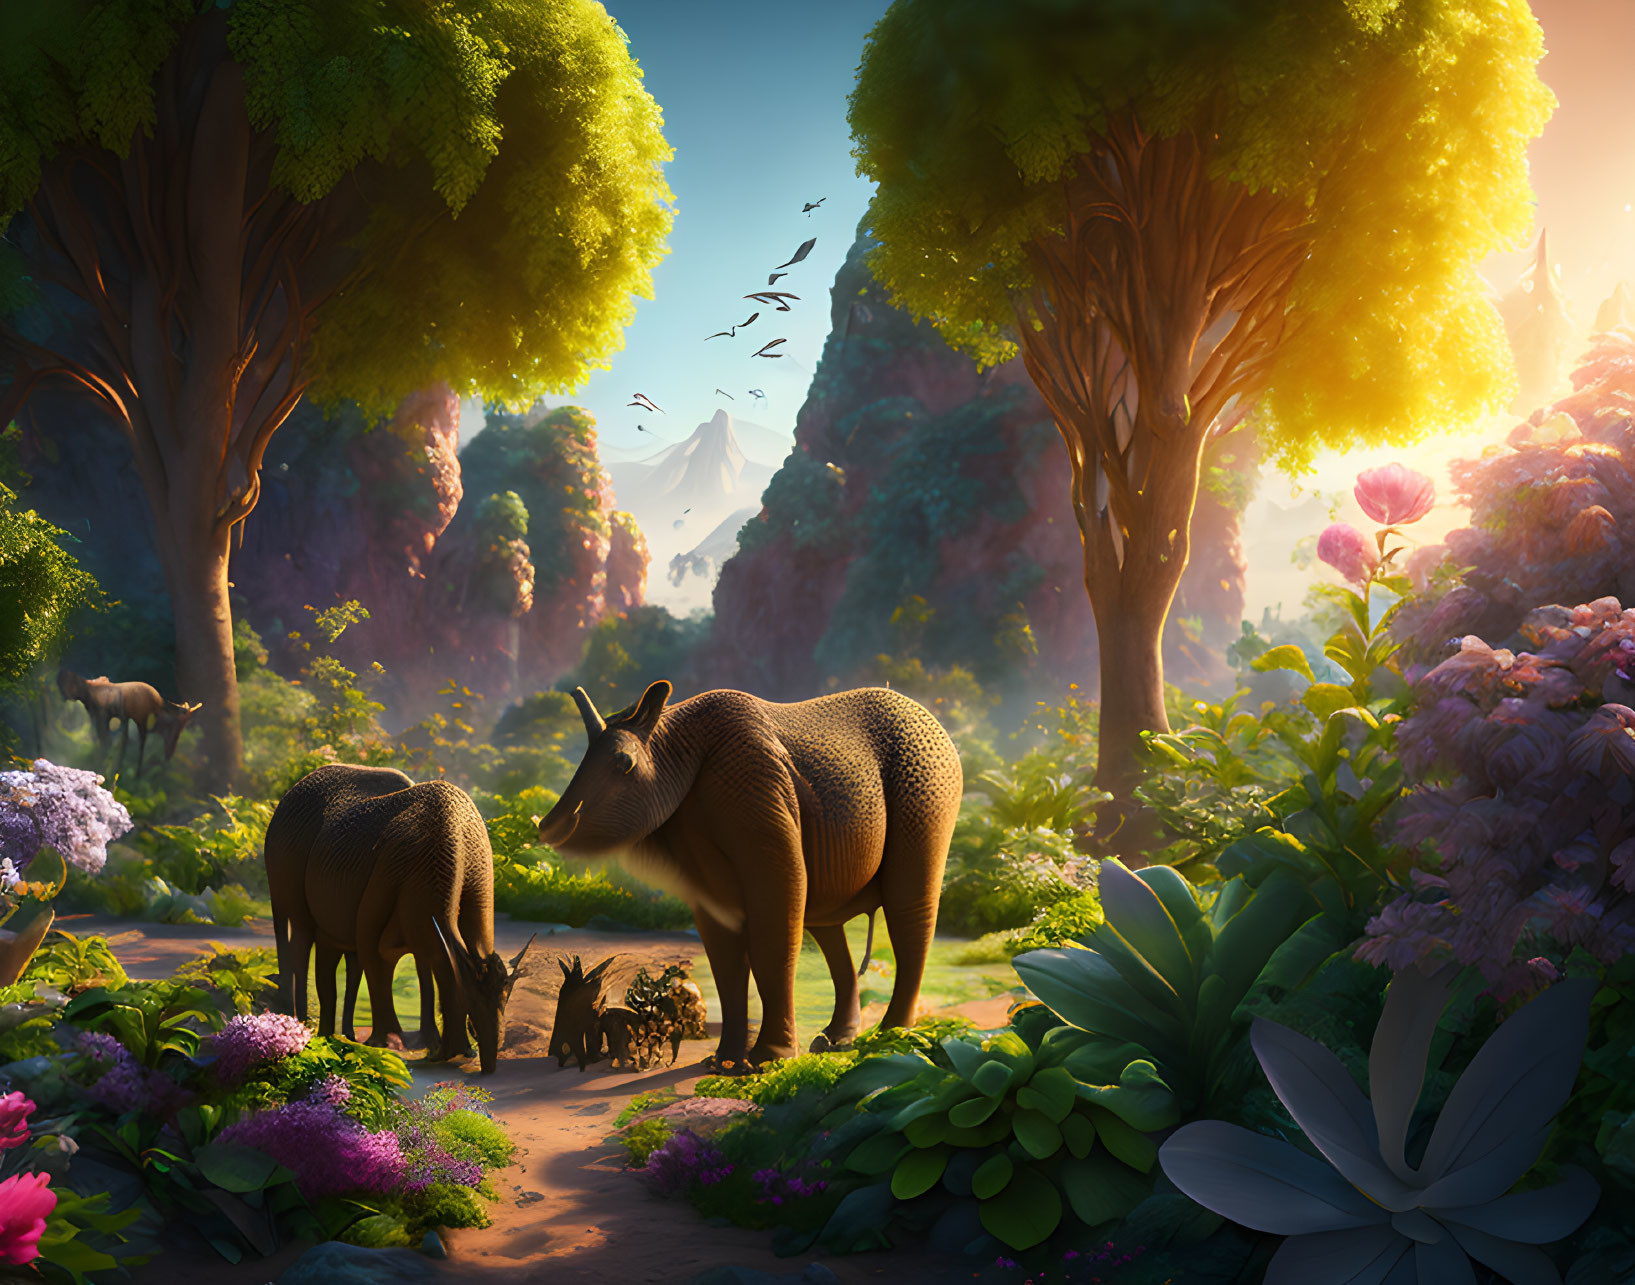 Vibrant enchanted forest with antelope-like creatures and sunlight rays